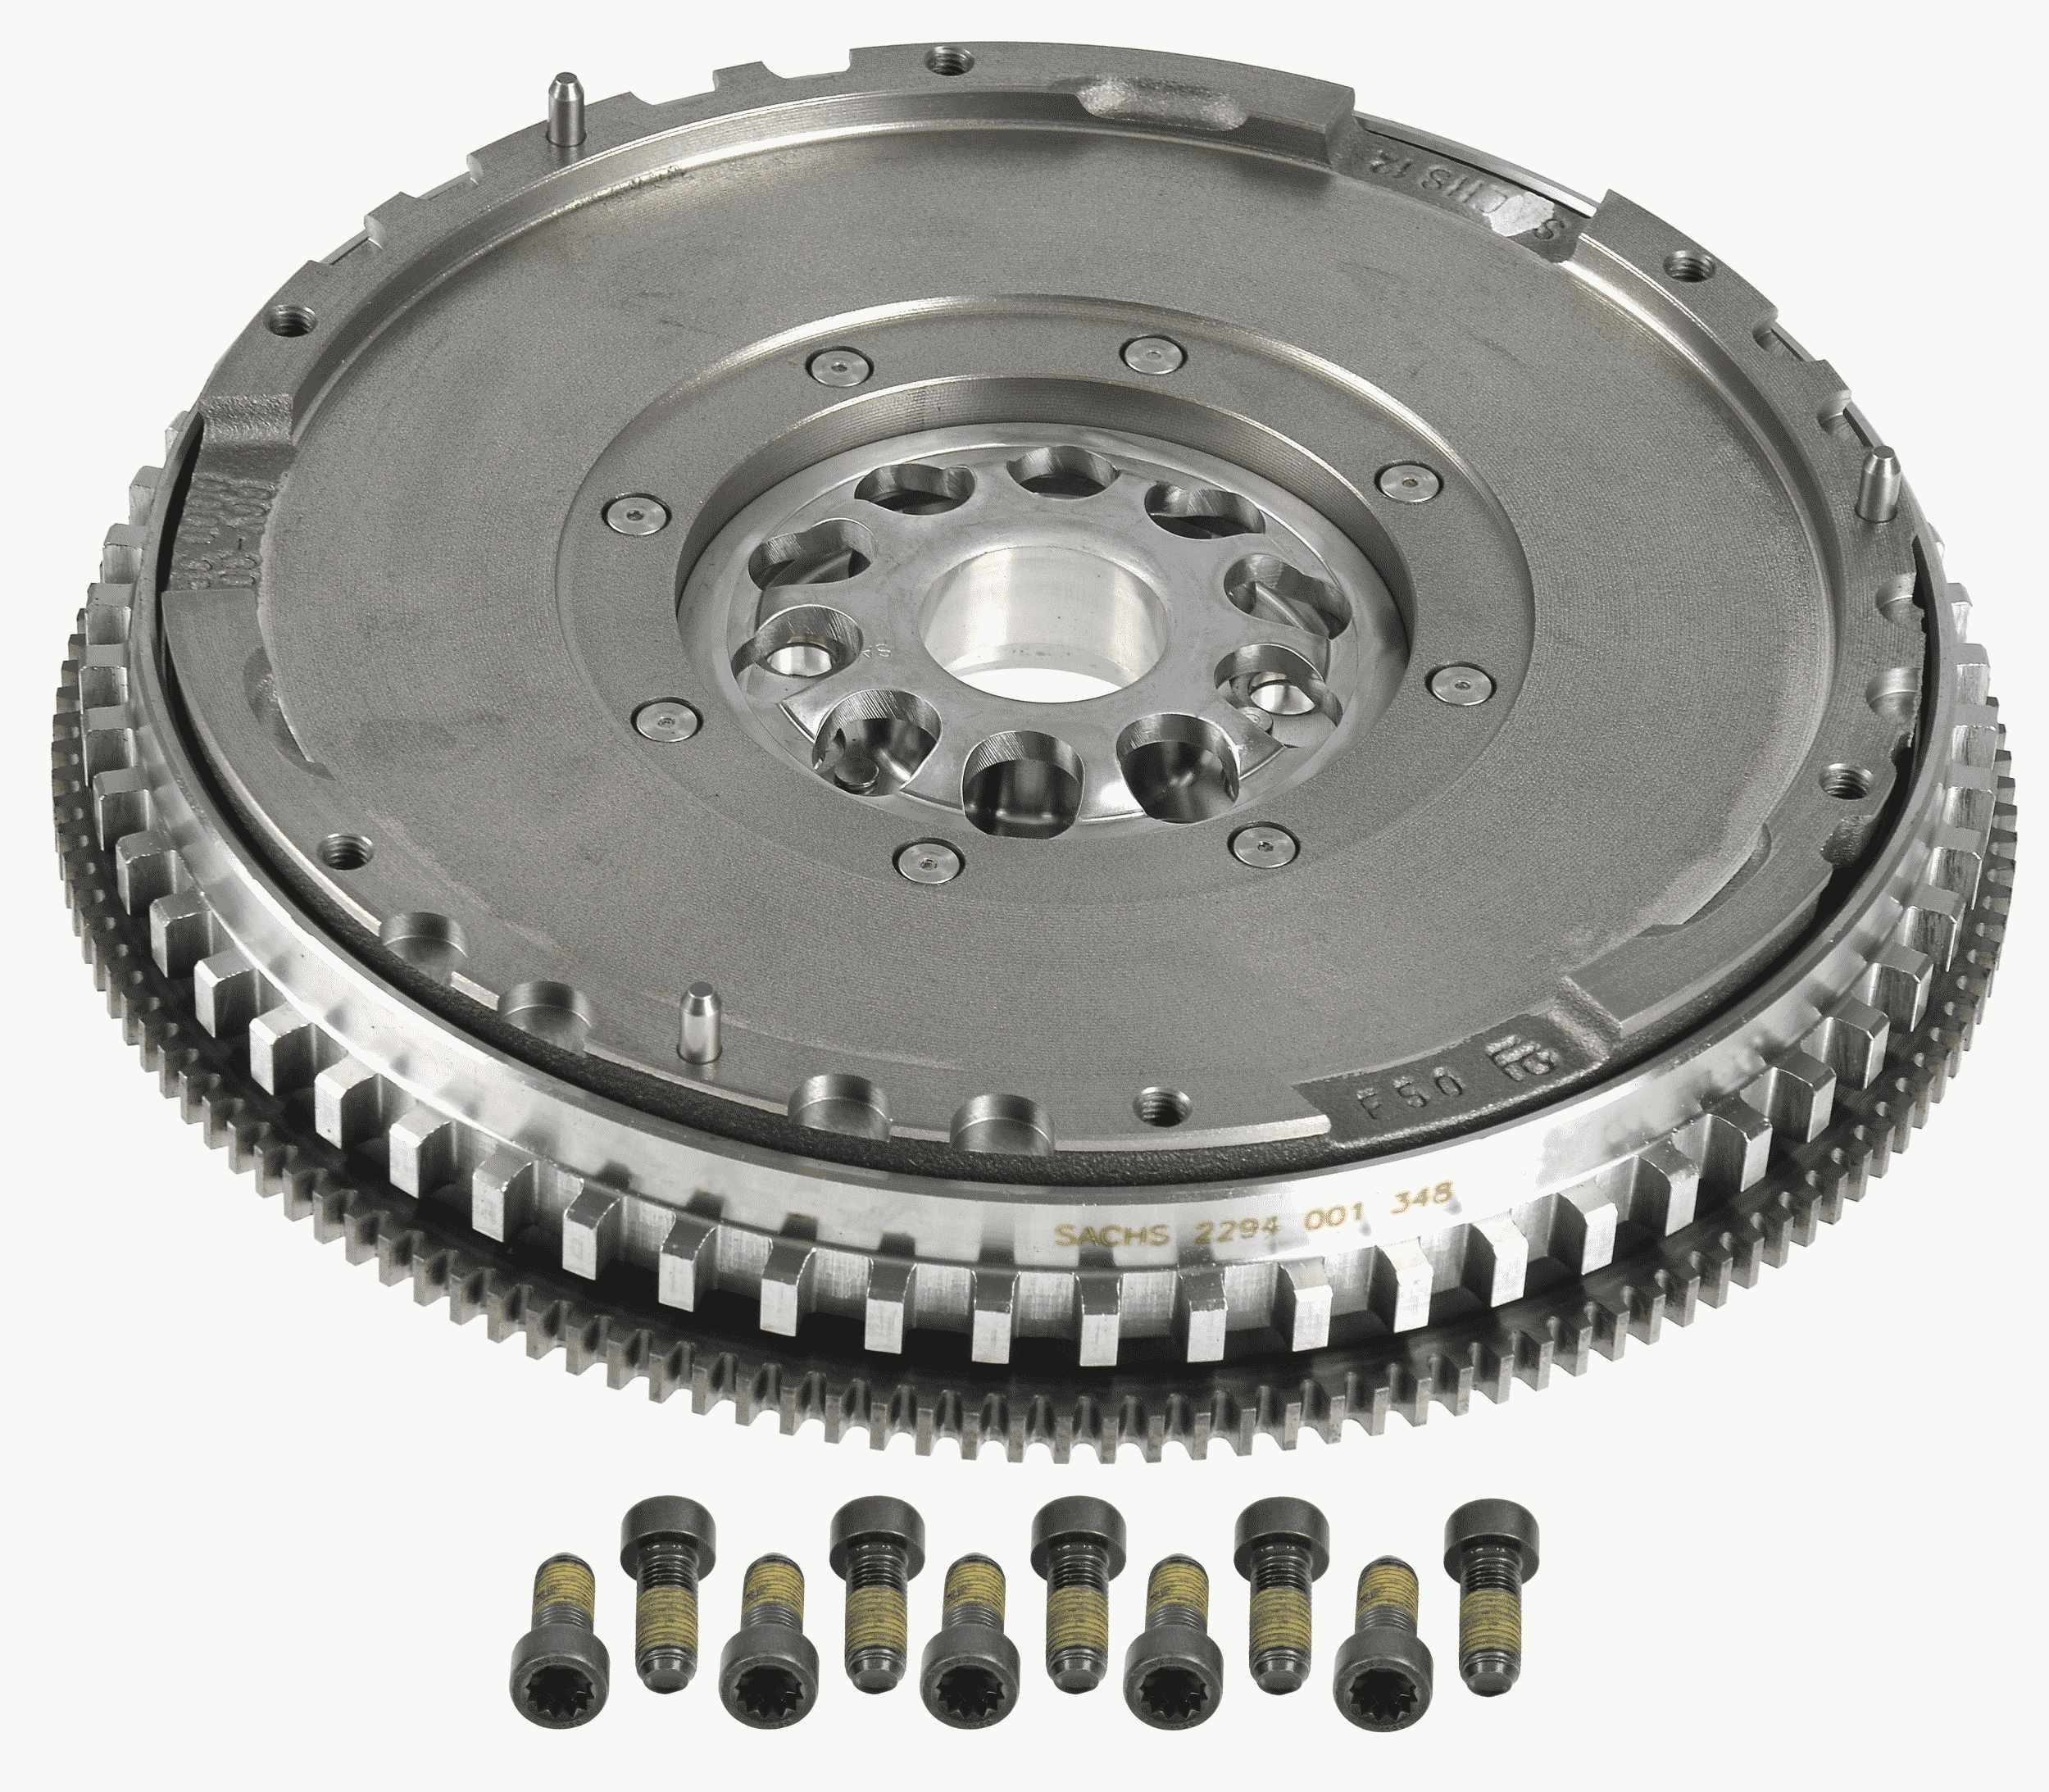 Great value for money - SACHS Dual mass flywheel 2294 001 348